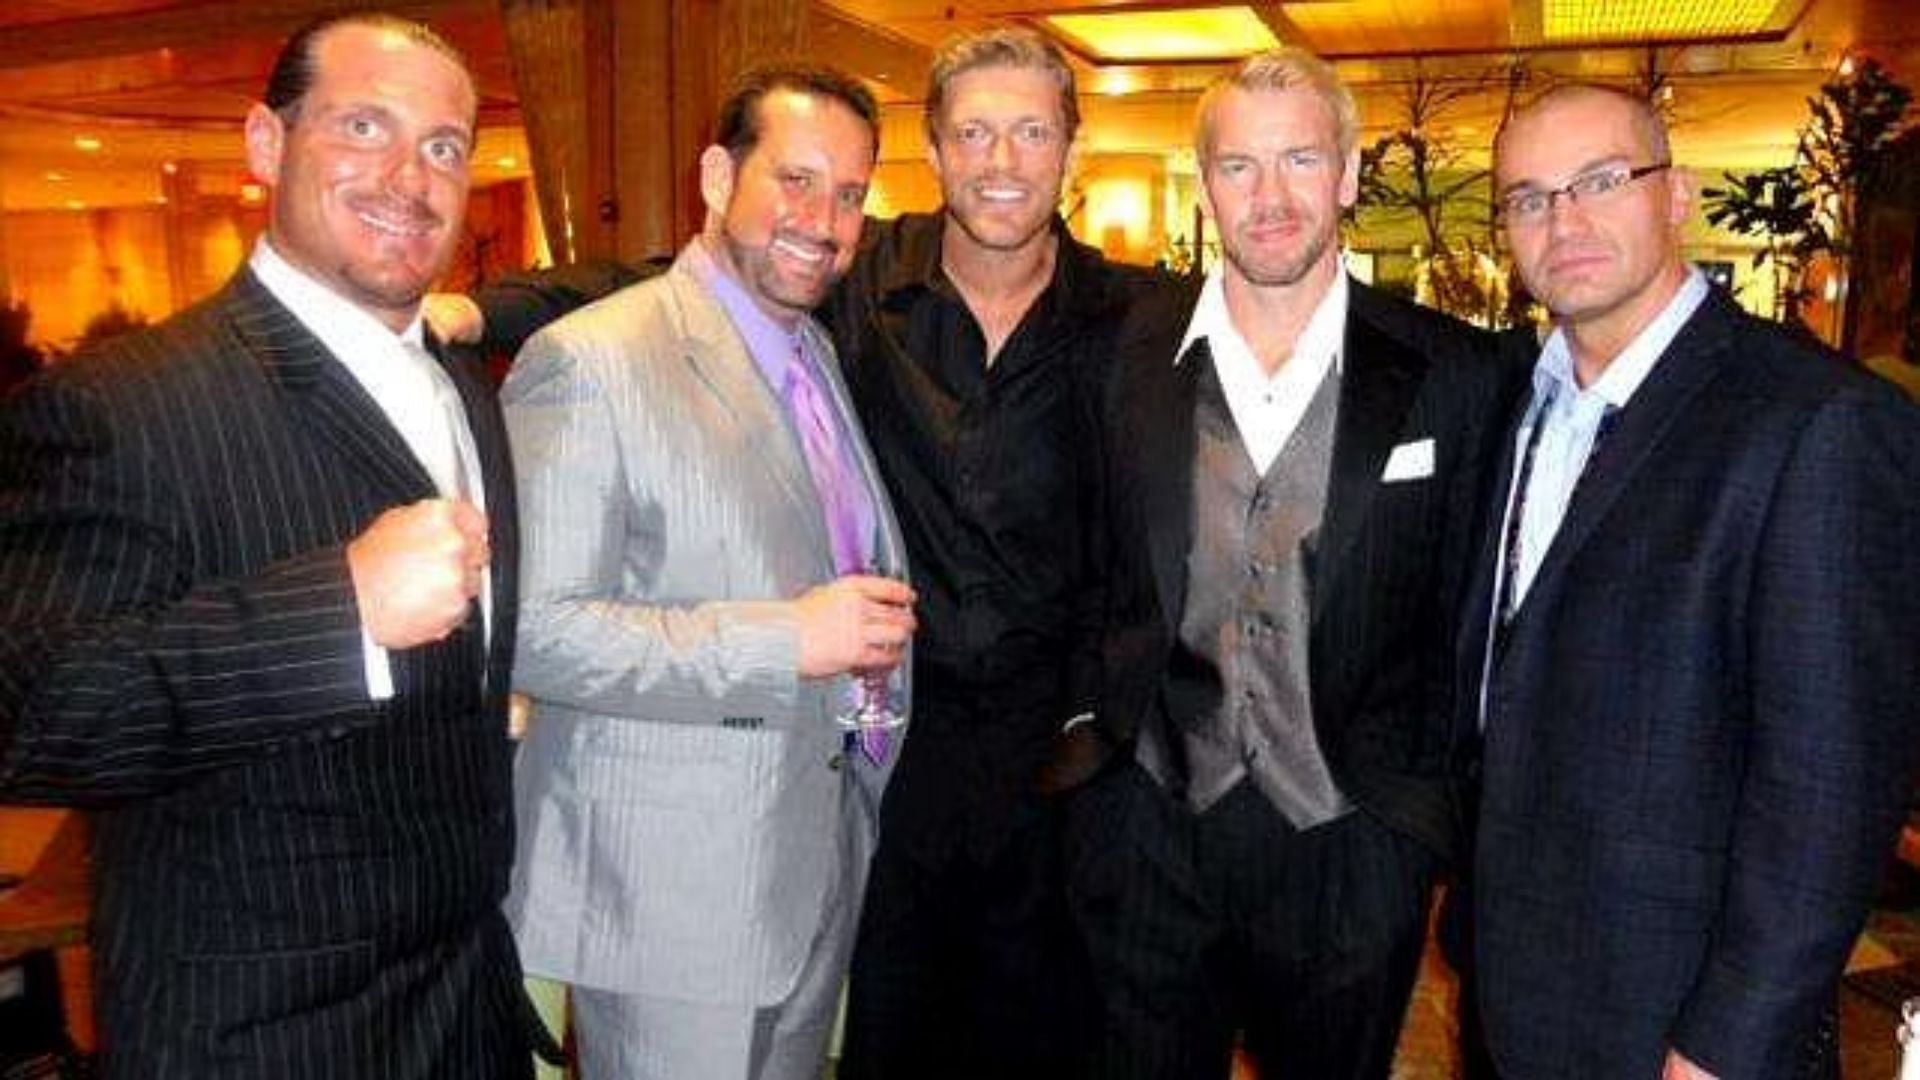 Rhyno (left) and Edge (center) after Edge&rsquo;s HOF induction ceremony